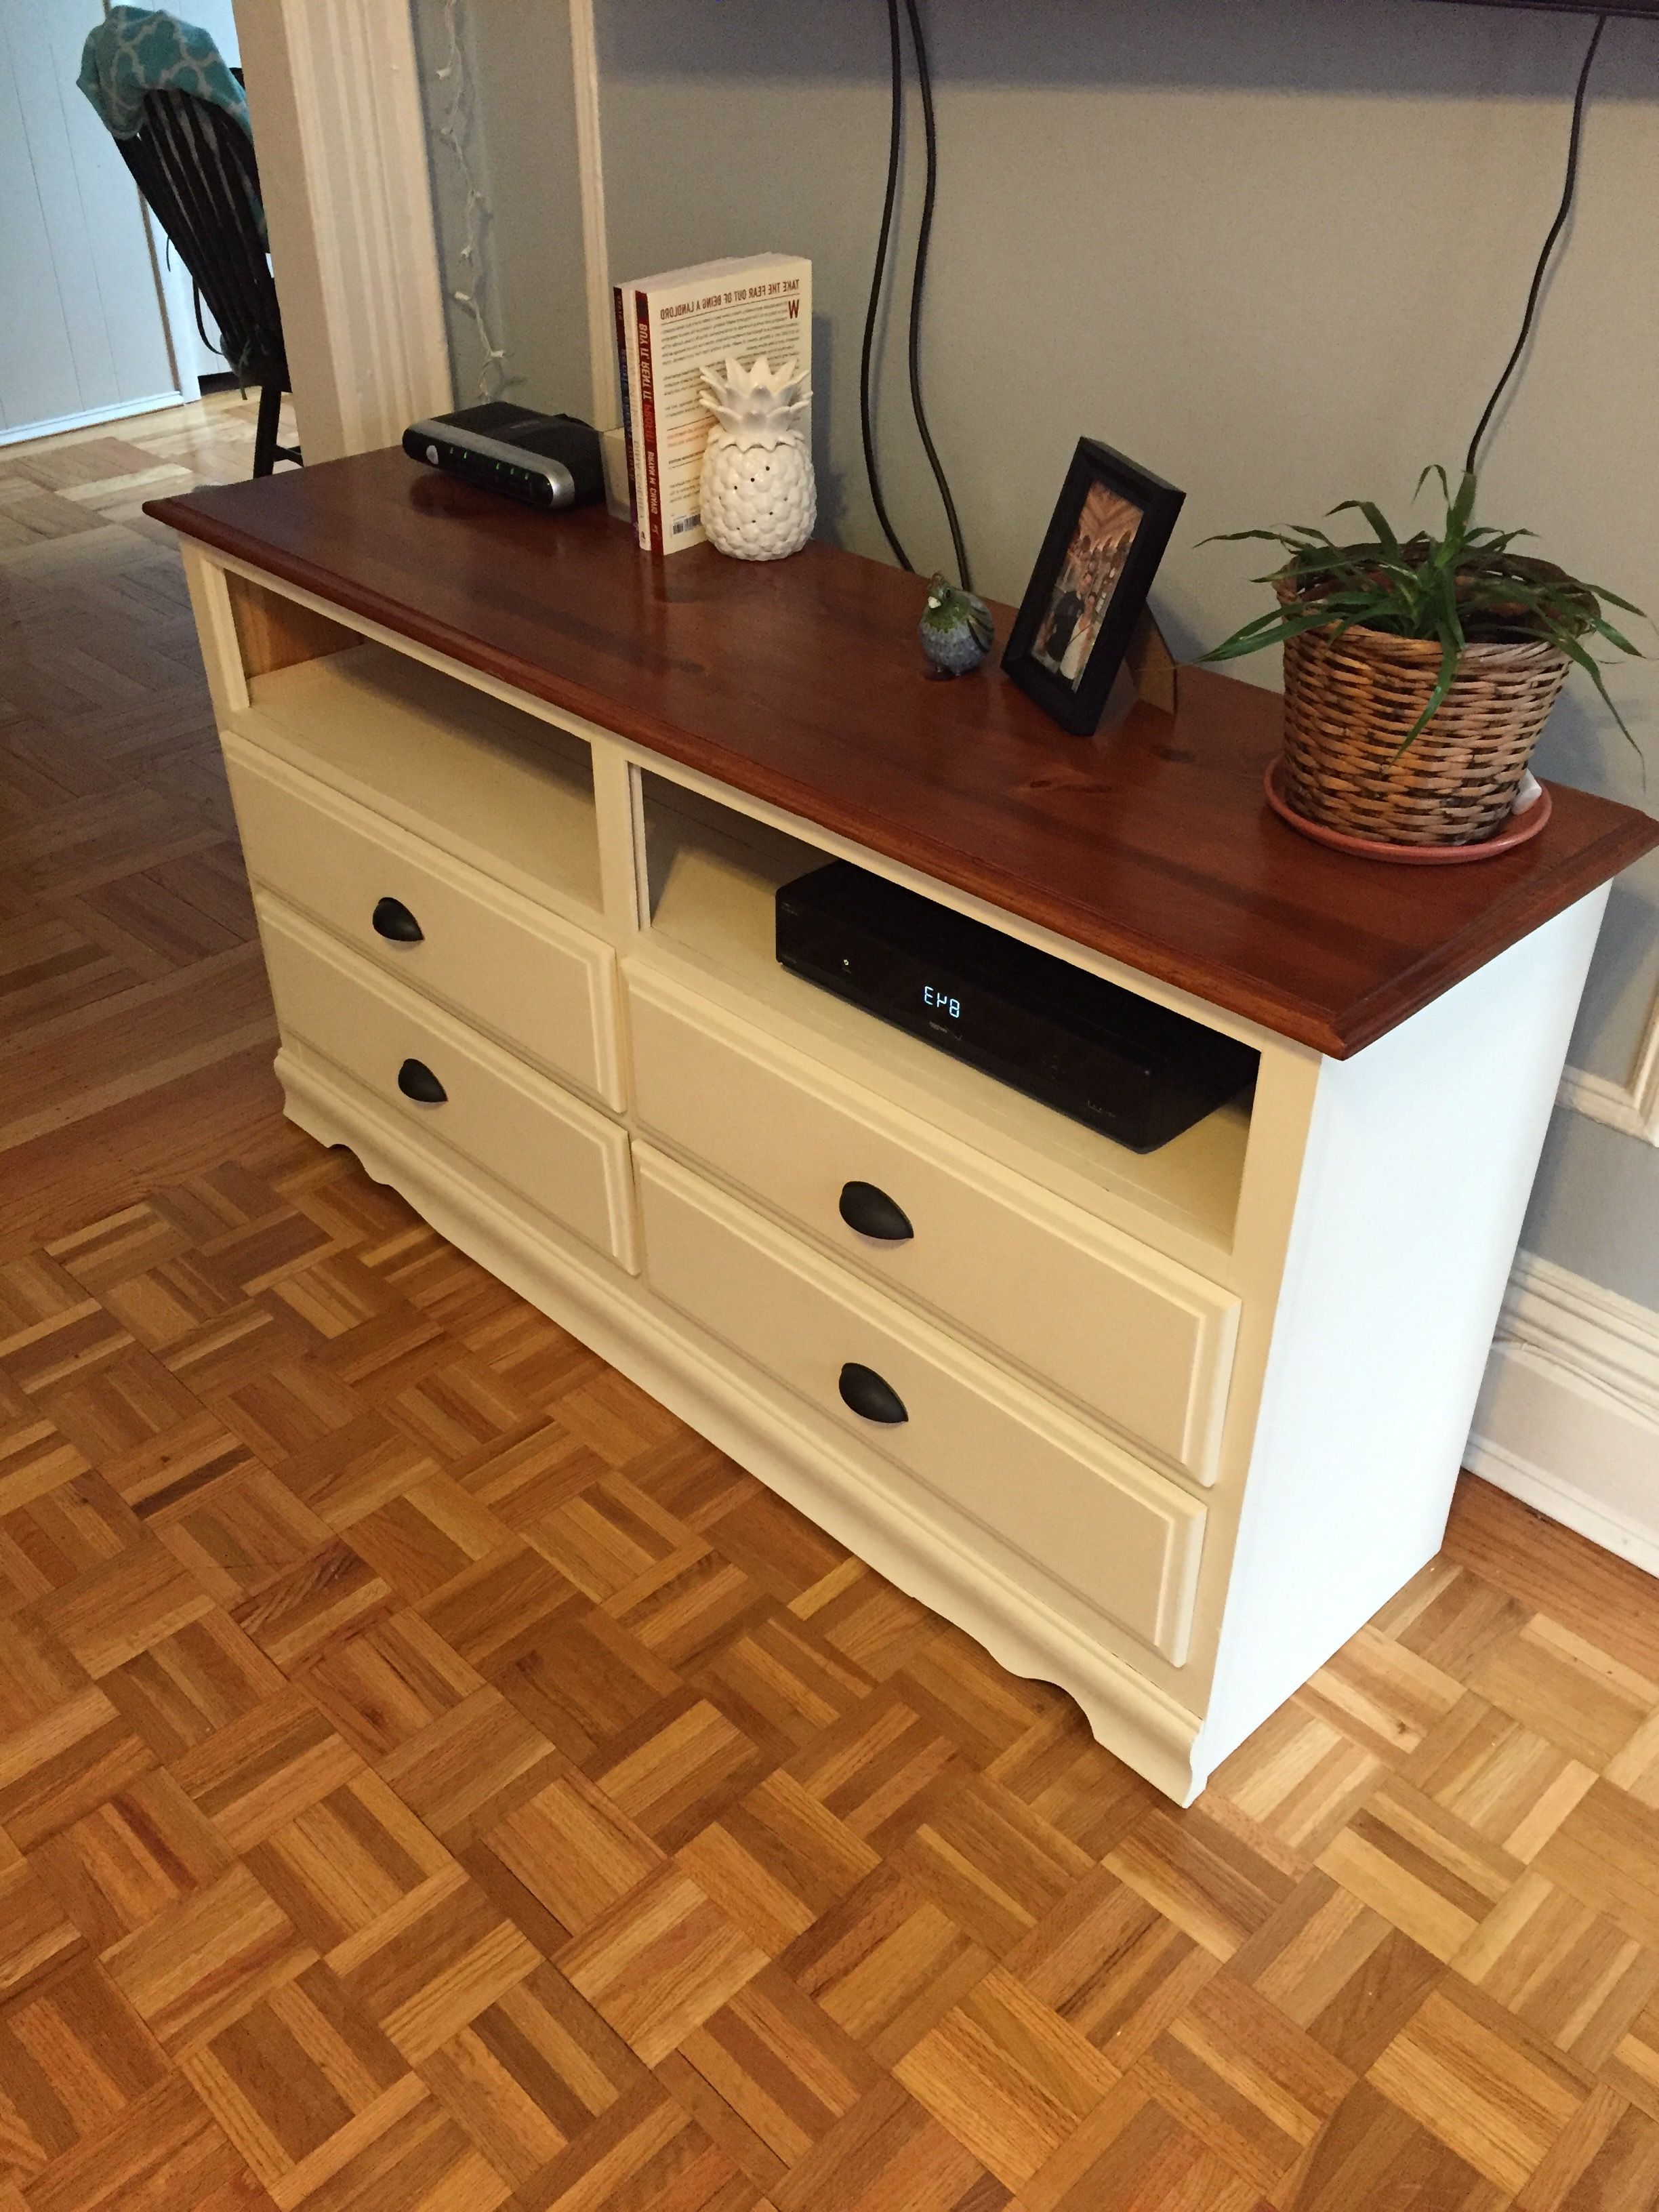 Widely Used Dresser And Tv Stands Combination With Regard To Dresser To Tv Stand … (View 9 of 20)